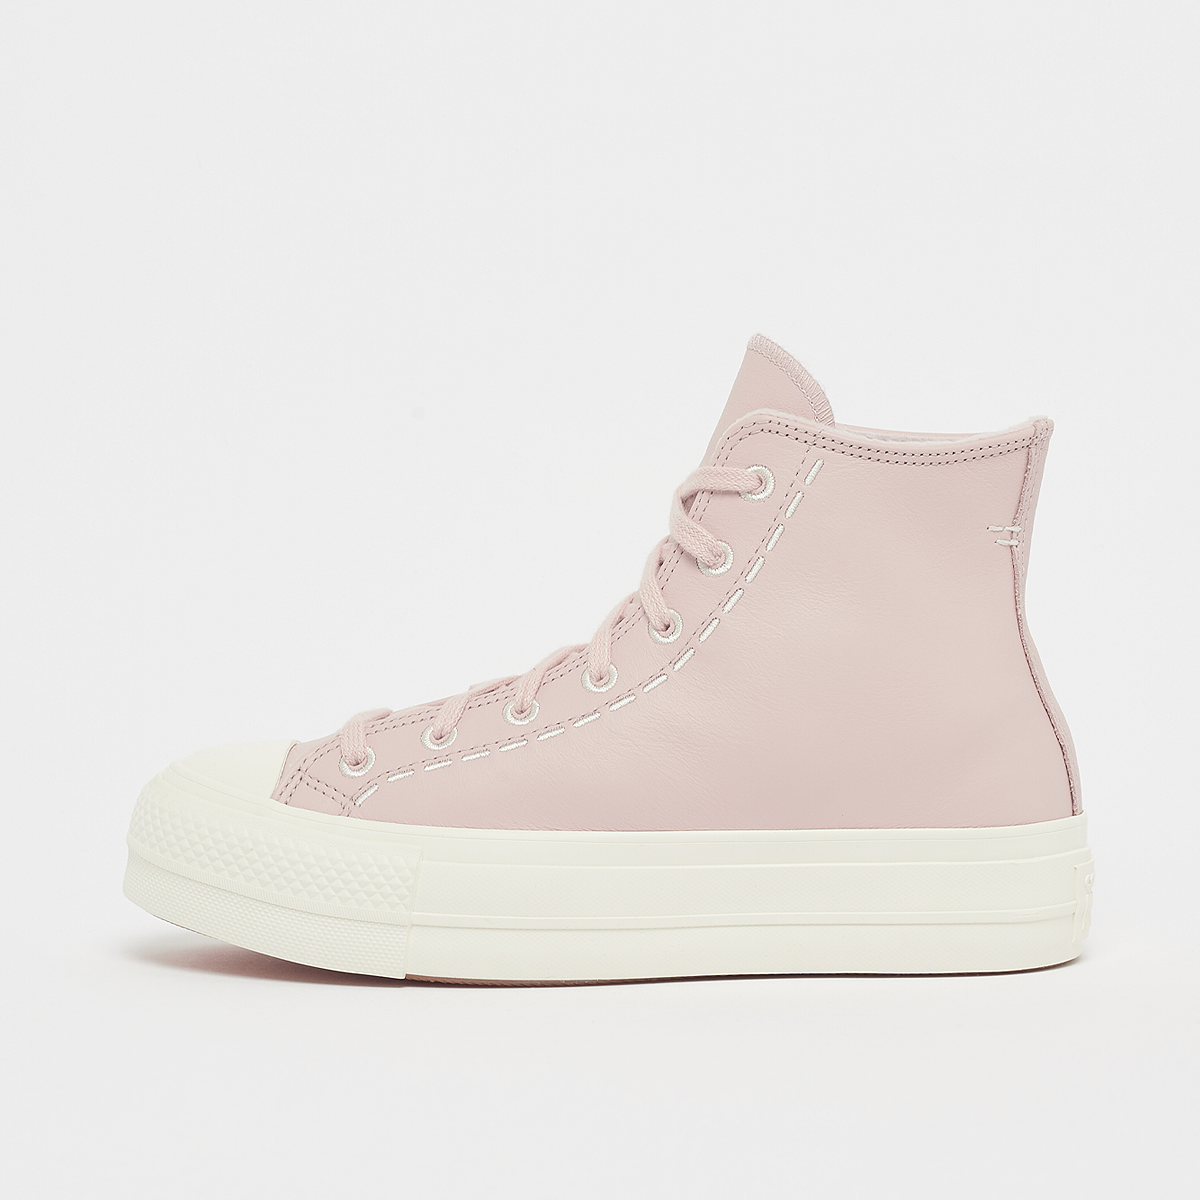 Chuck Taylor All Star Lift, Converse, Footwear, pink sage/pink sage/egret, taille: 36.5